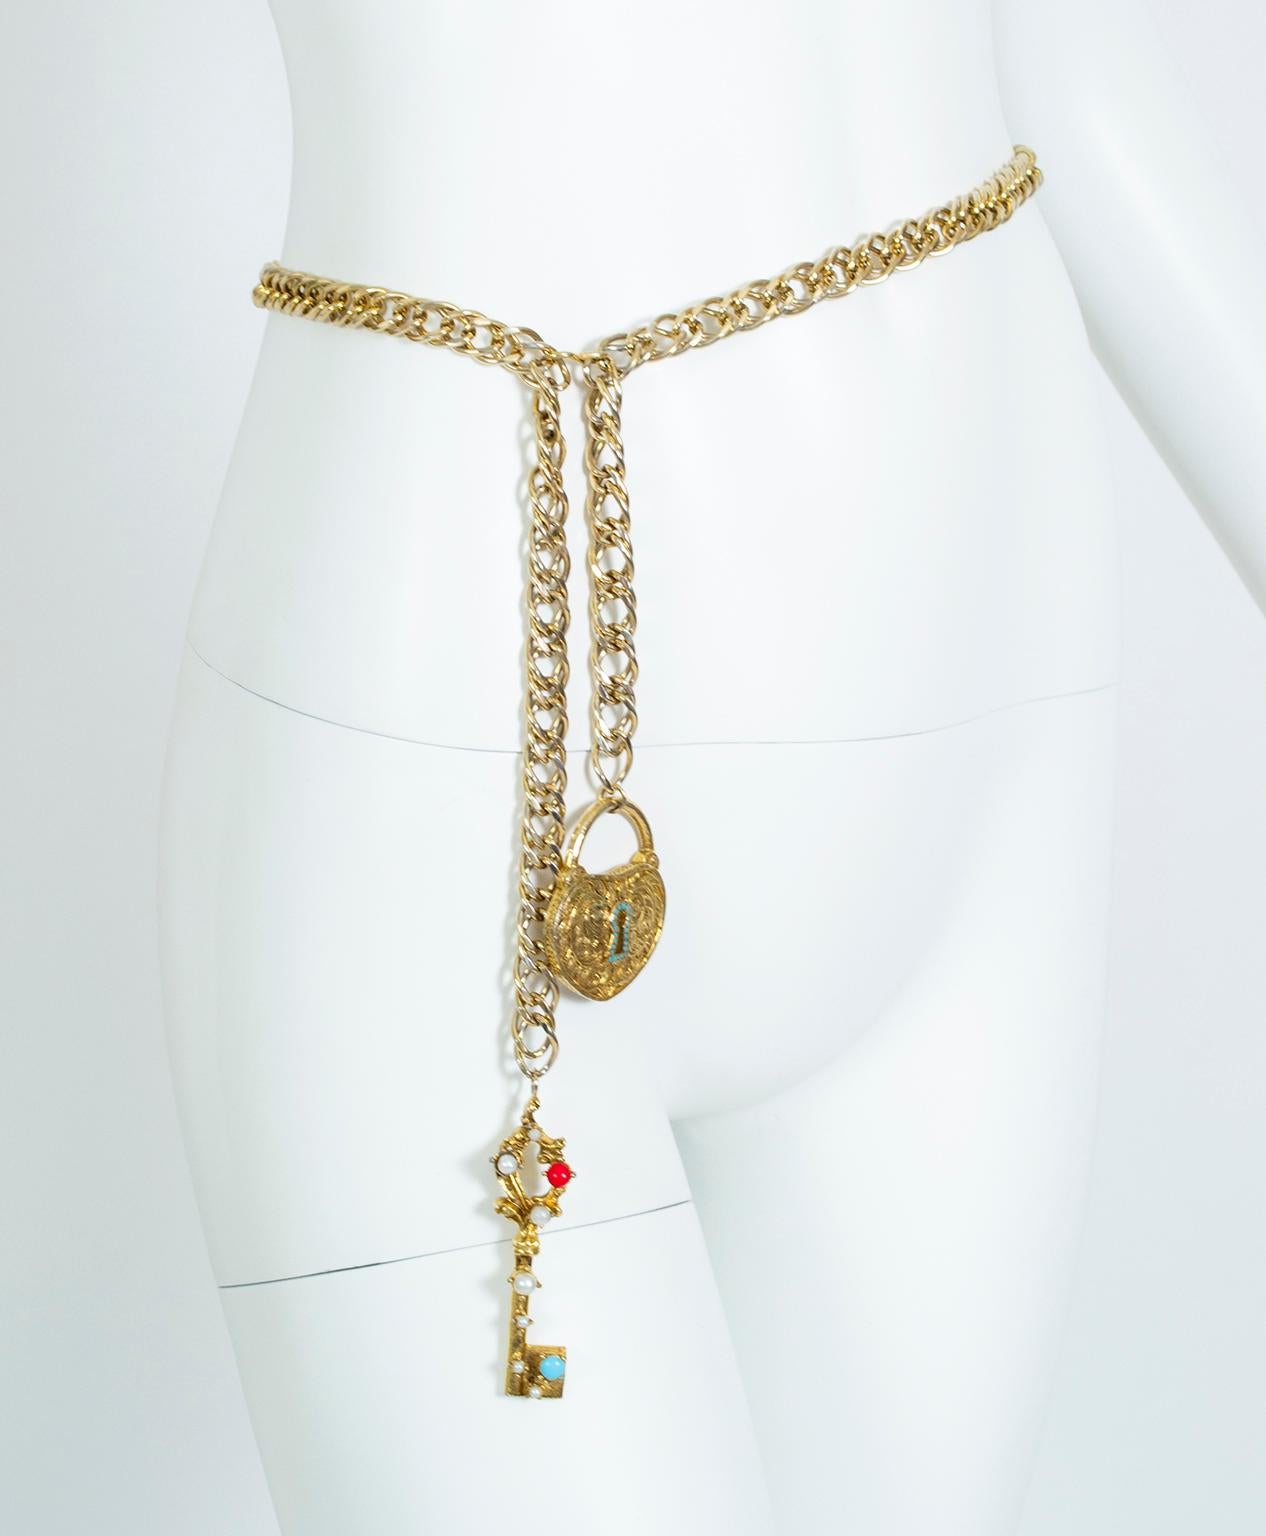 A luxurious promise, this chain belt is reminiscent of Chanel's uber-rare lock and key belts from the 80s--except that it pre-dates them by a cool 20 years. Set with multicolored cabochons and faux pearls, it may be worn as a belt or necklace with